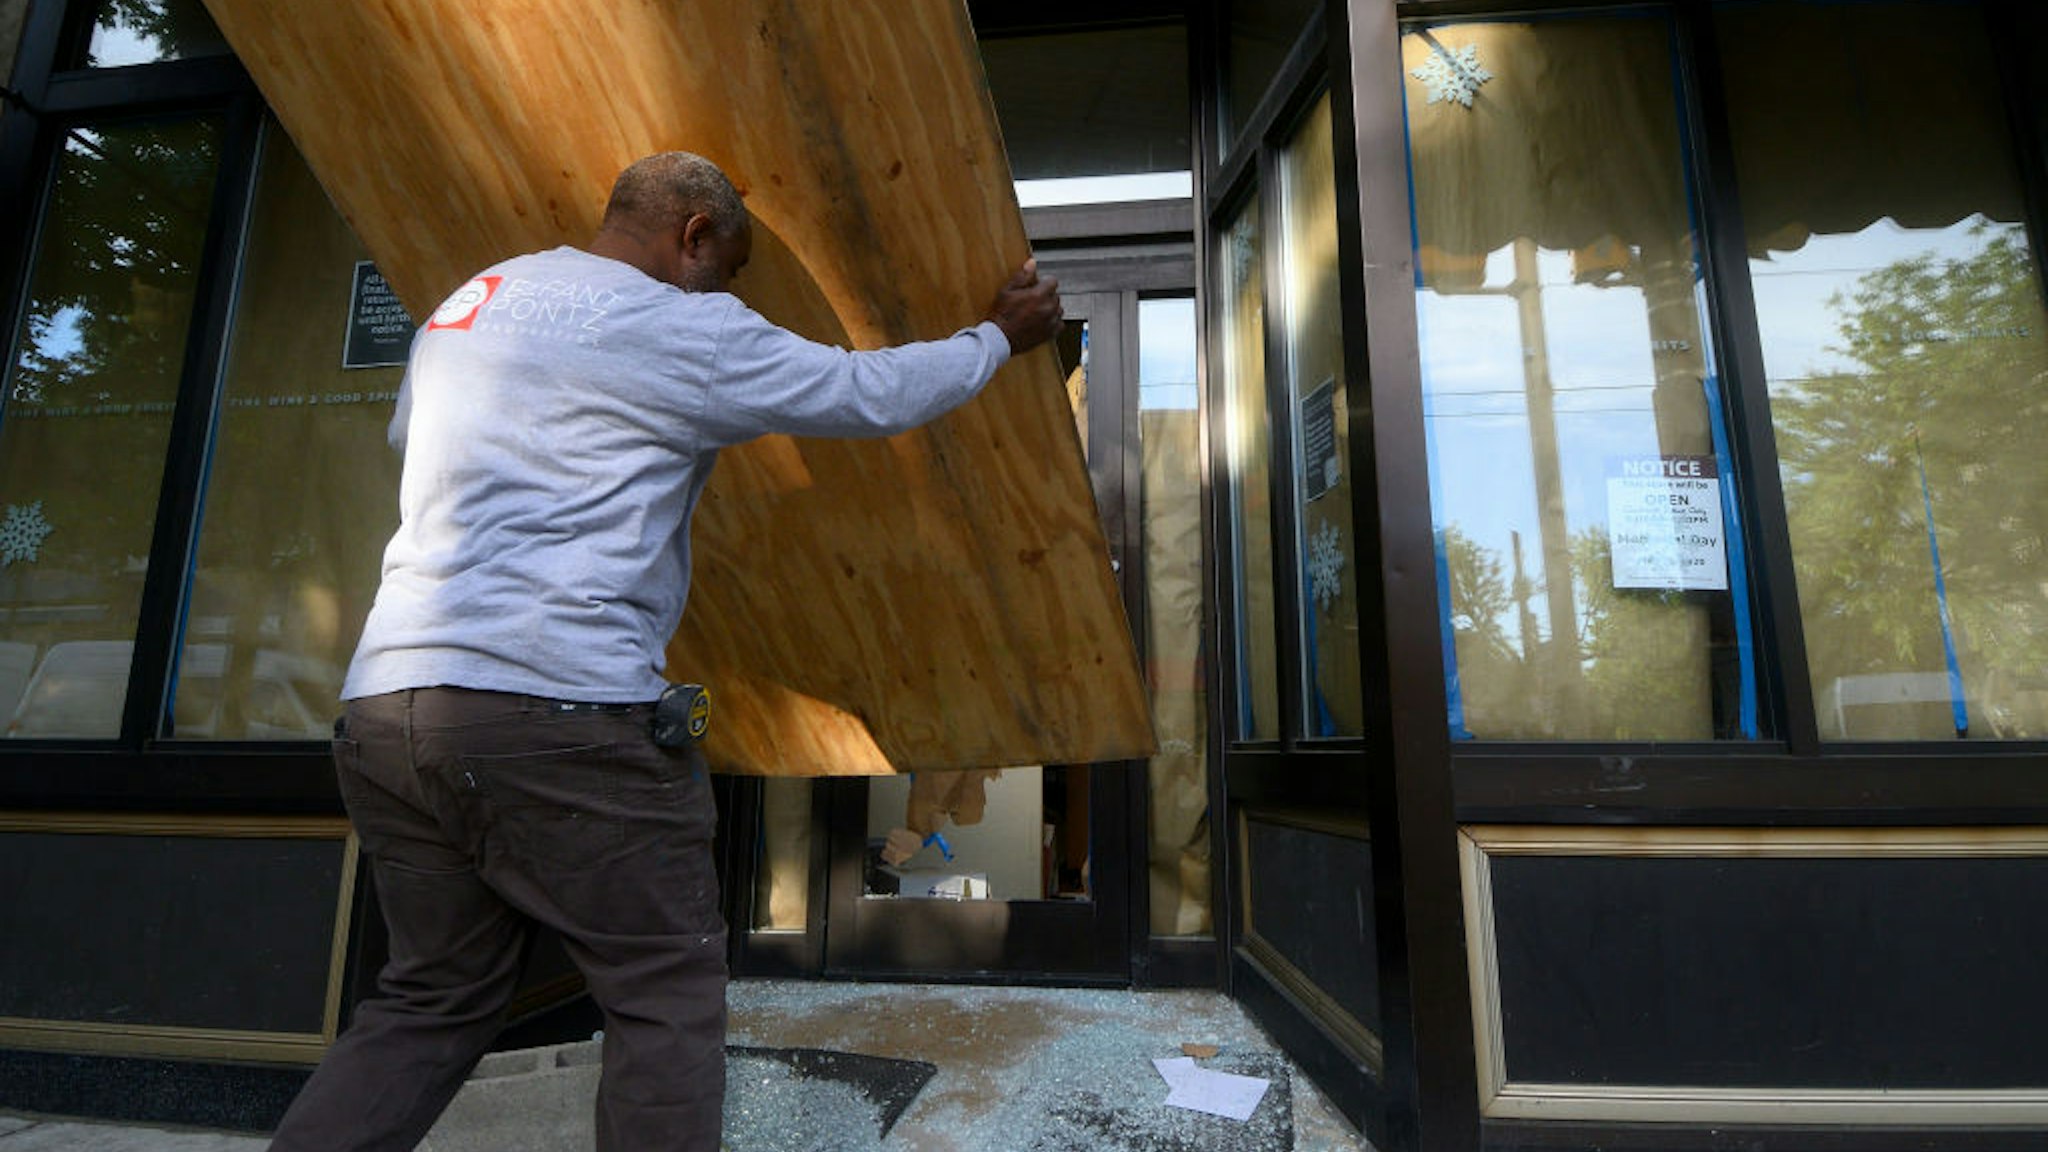 A passerby voluntarily boards up the state-owned wine and liquor store after it is vandalized overnight, in the Mt Airy neighborhood in Philadelphia, PA on June 1, 2020. On Monday morning National Guard troops arrived to assist policing the city after two days of unrest and protests over the death of George Floyd. (Photo by Bastiaan Slabbers/NurPhoto via Getty Images)